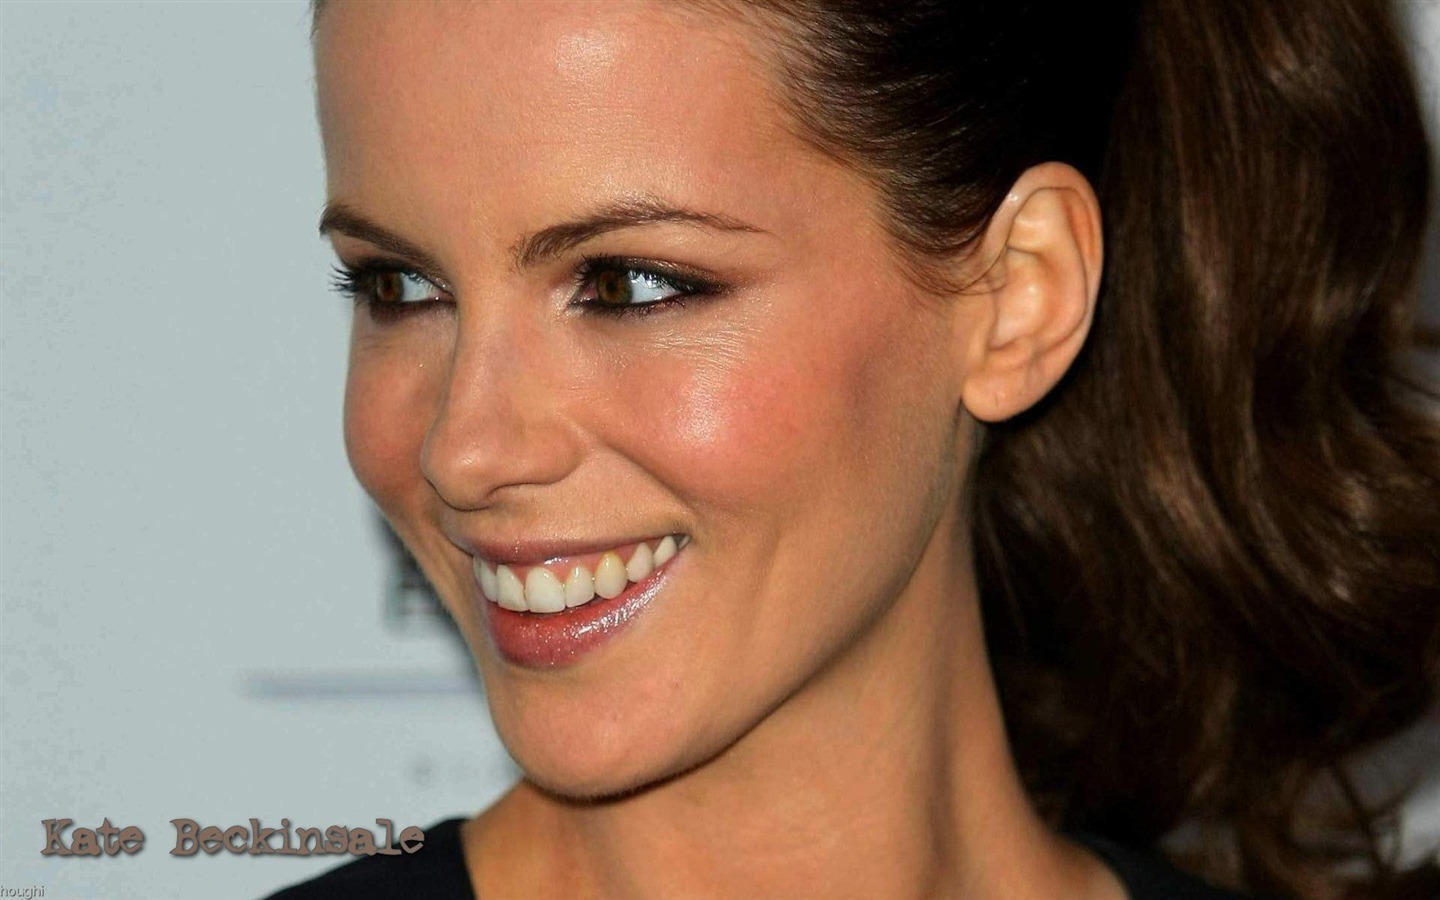 Kate Beckinsale #077 - 1440x900 Wallpapers Pictures Photos Images